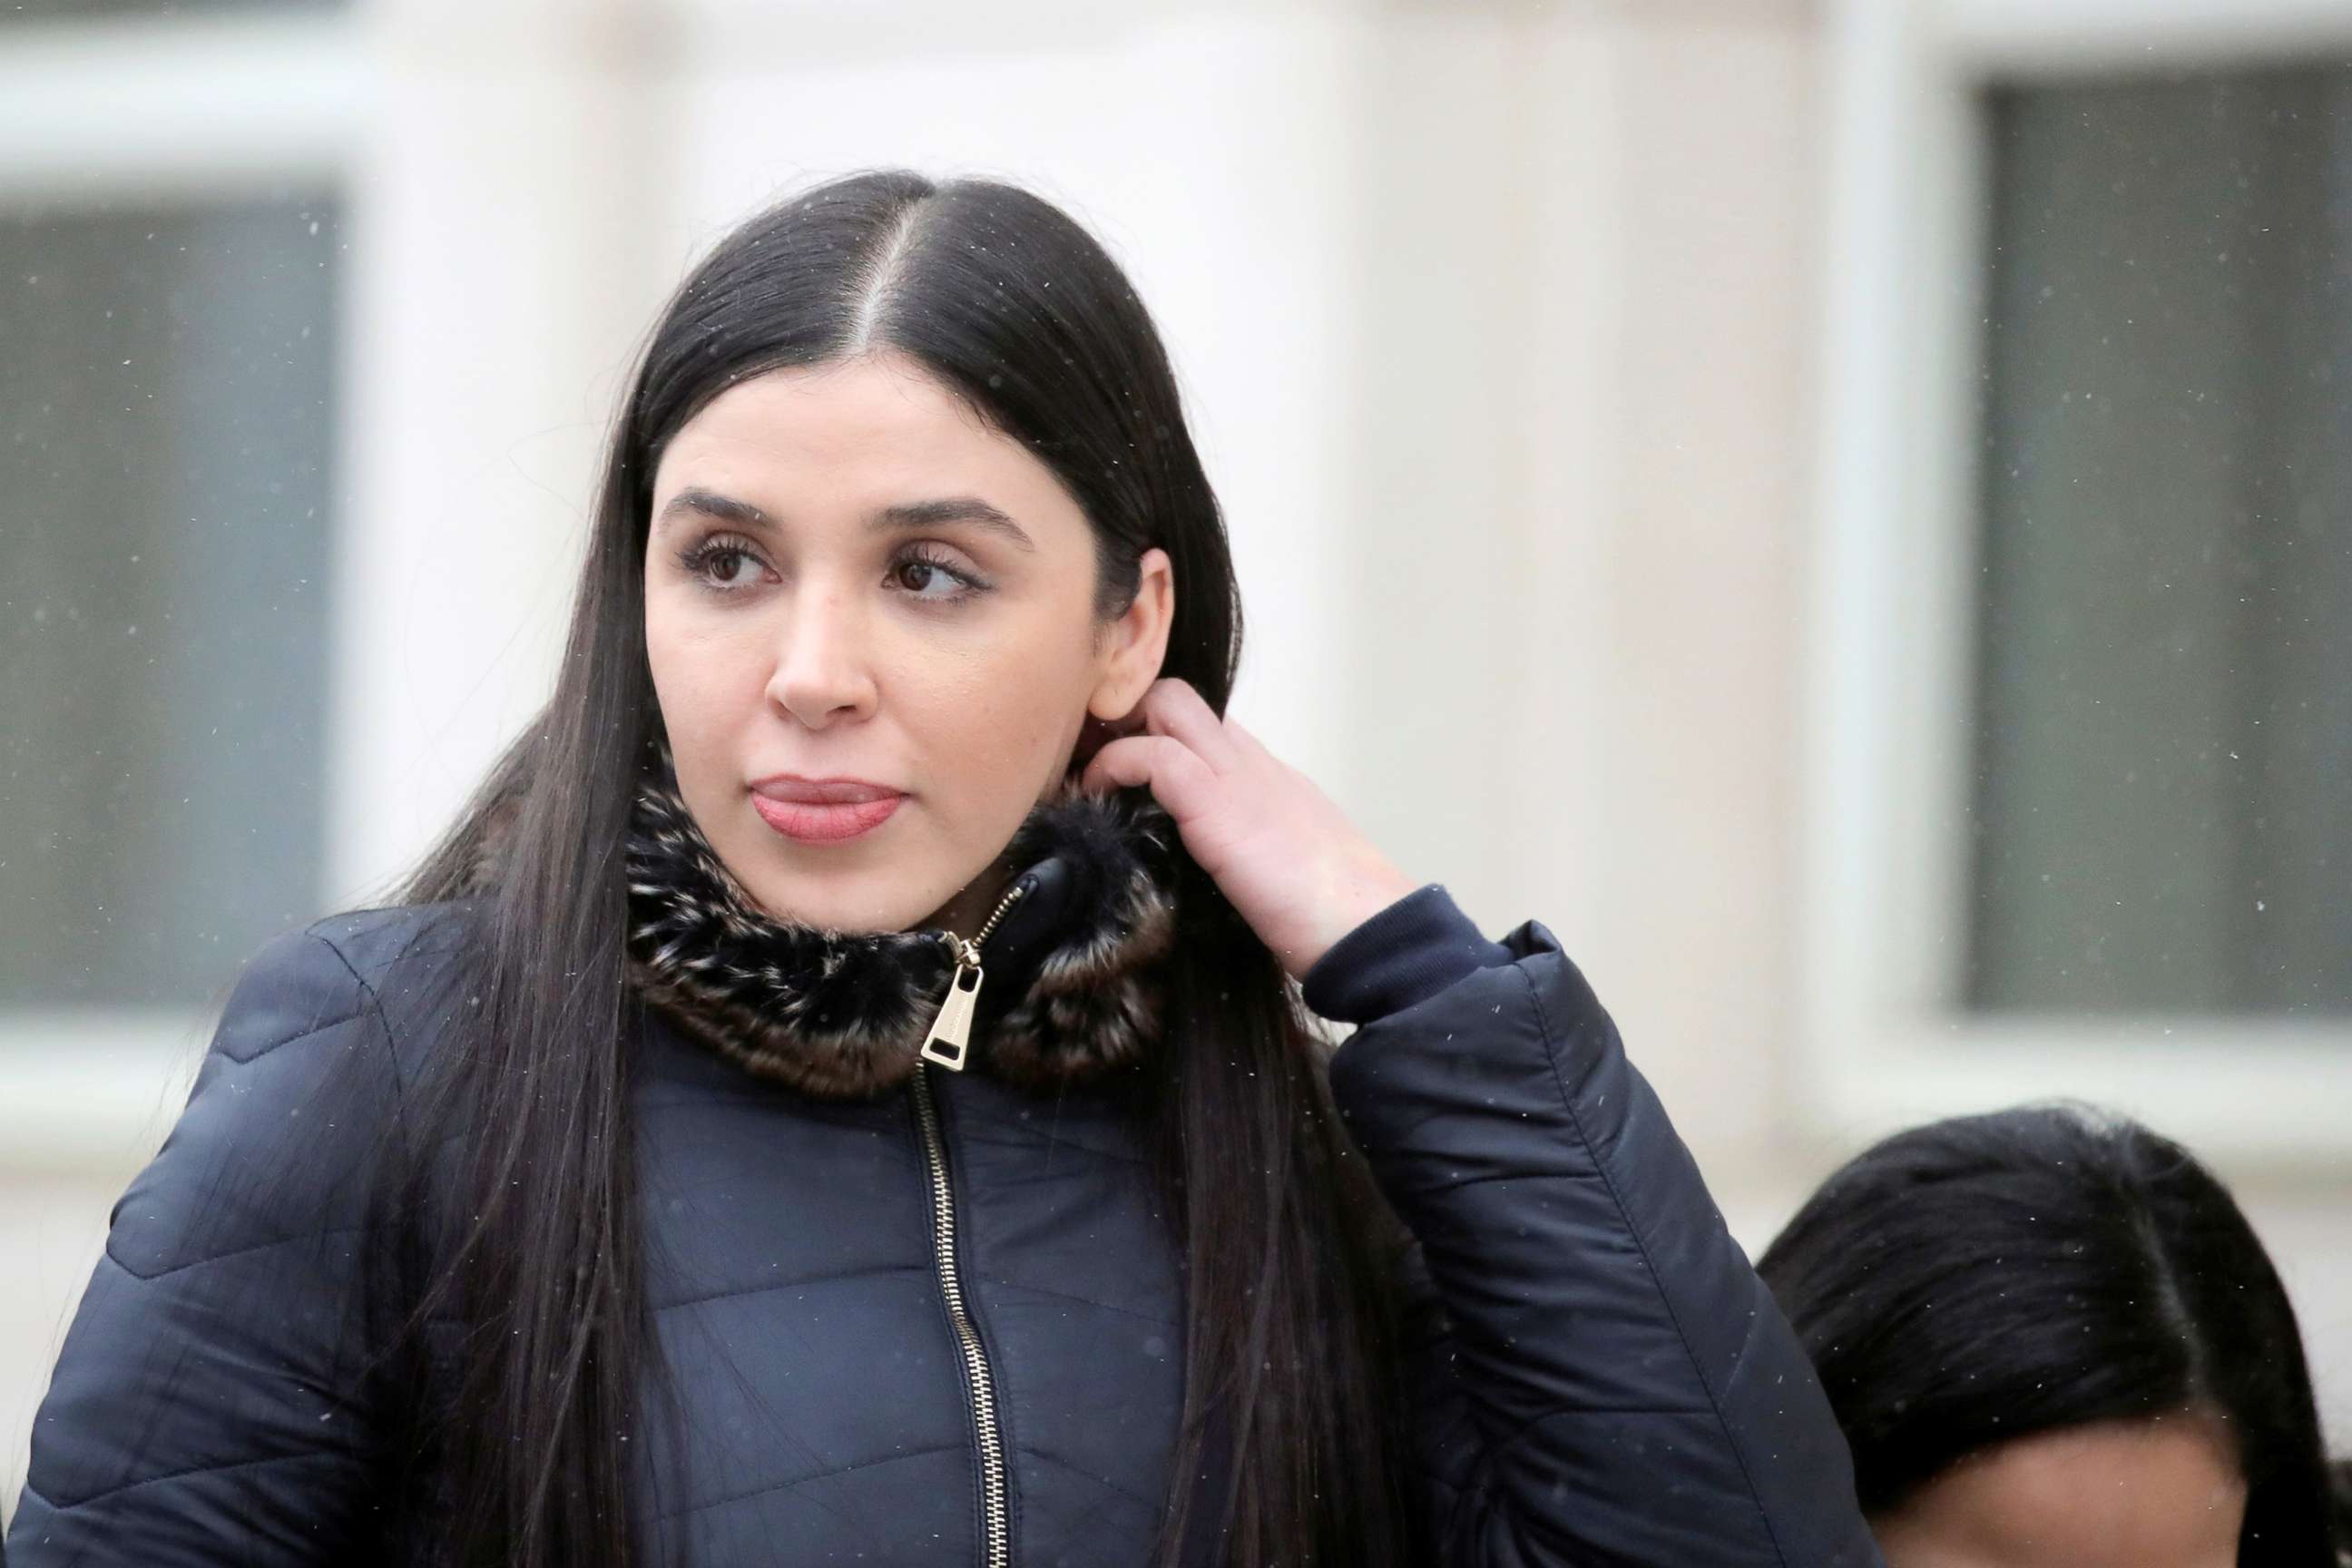 PHOTO: Emma Coronel Aispuro, the wife of Joaquin Guzman, departs after the trial of Mexican drug lord Guzman, known as "El Chapo", at the Brooklyn Federal Courthouse, in New York, Feb. 12, 2019. 